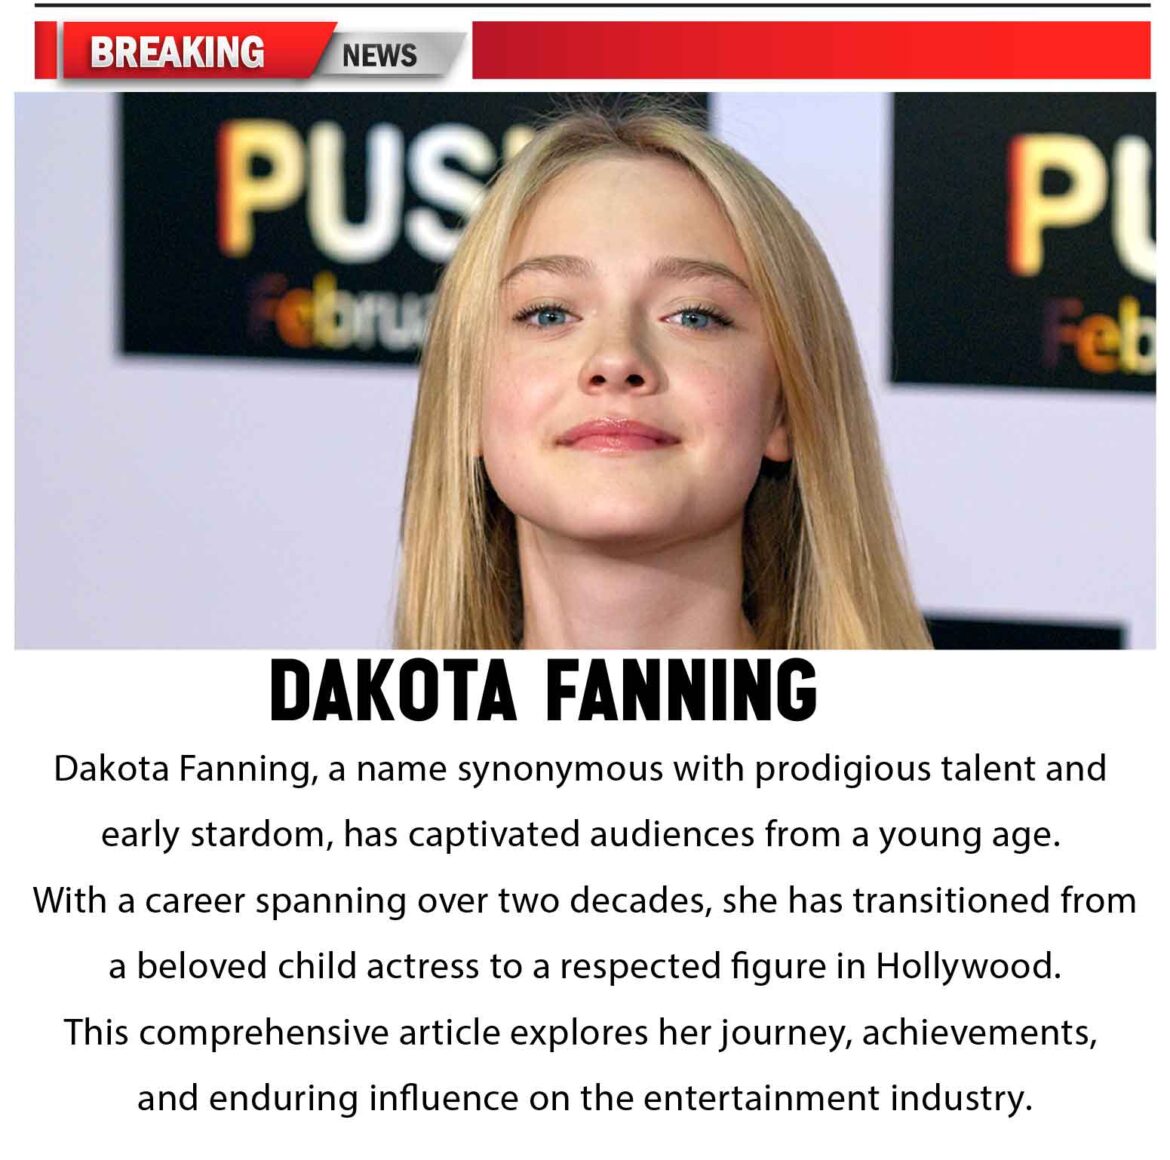 Dakota Fanning: A Comprehensive Look at Her Life and Career